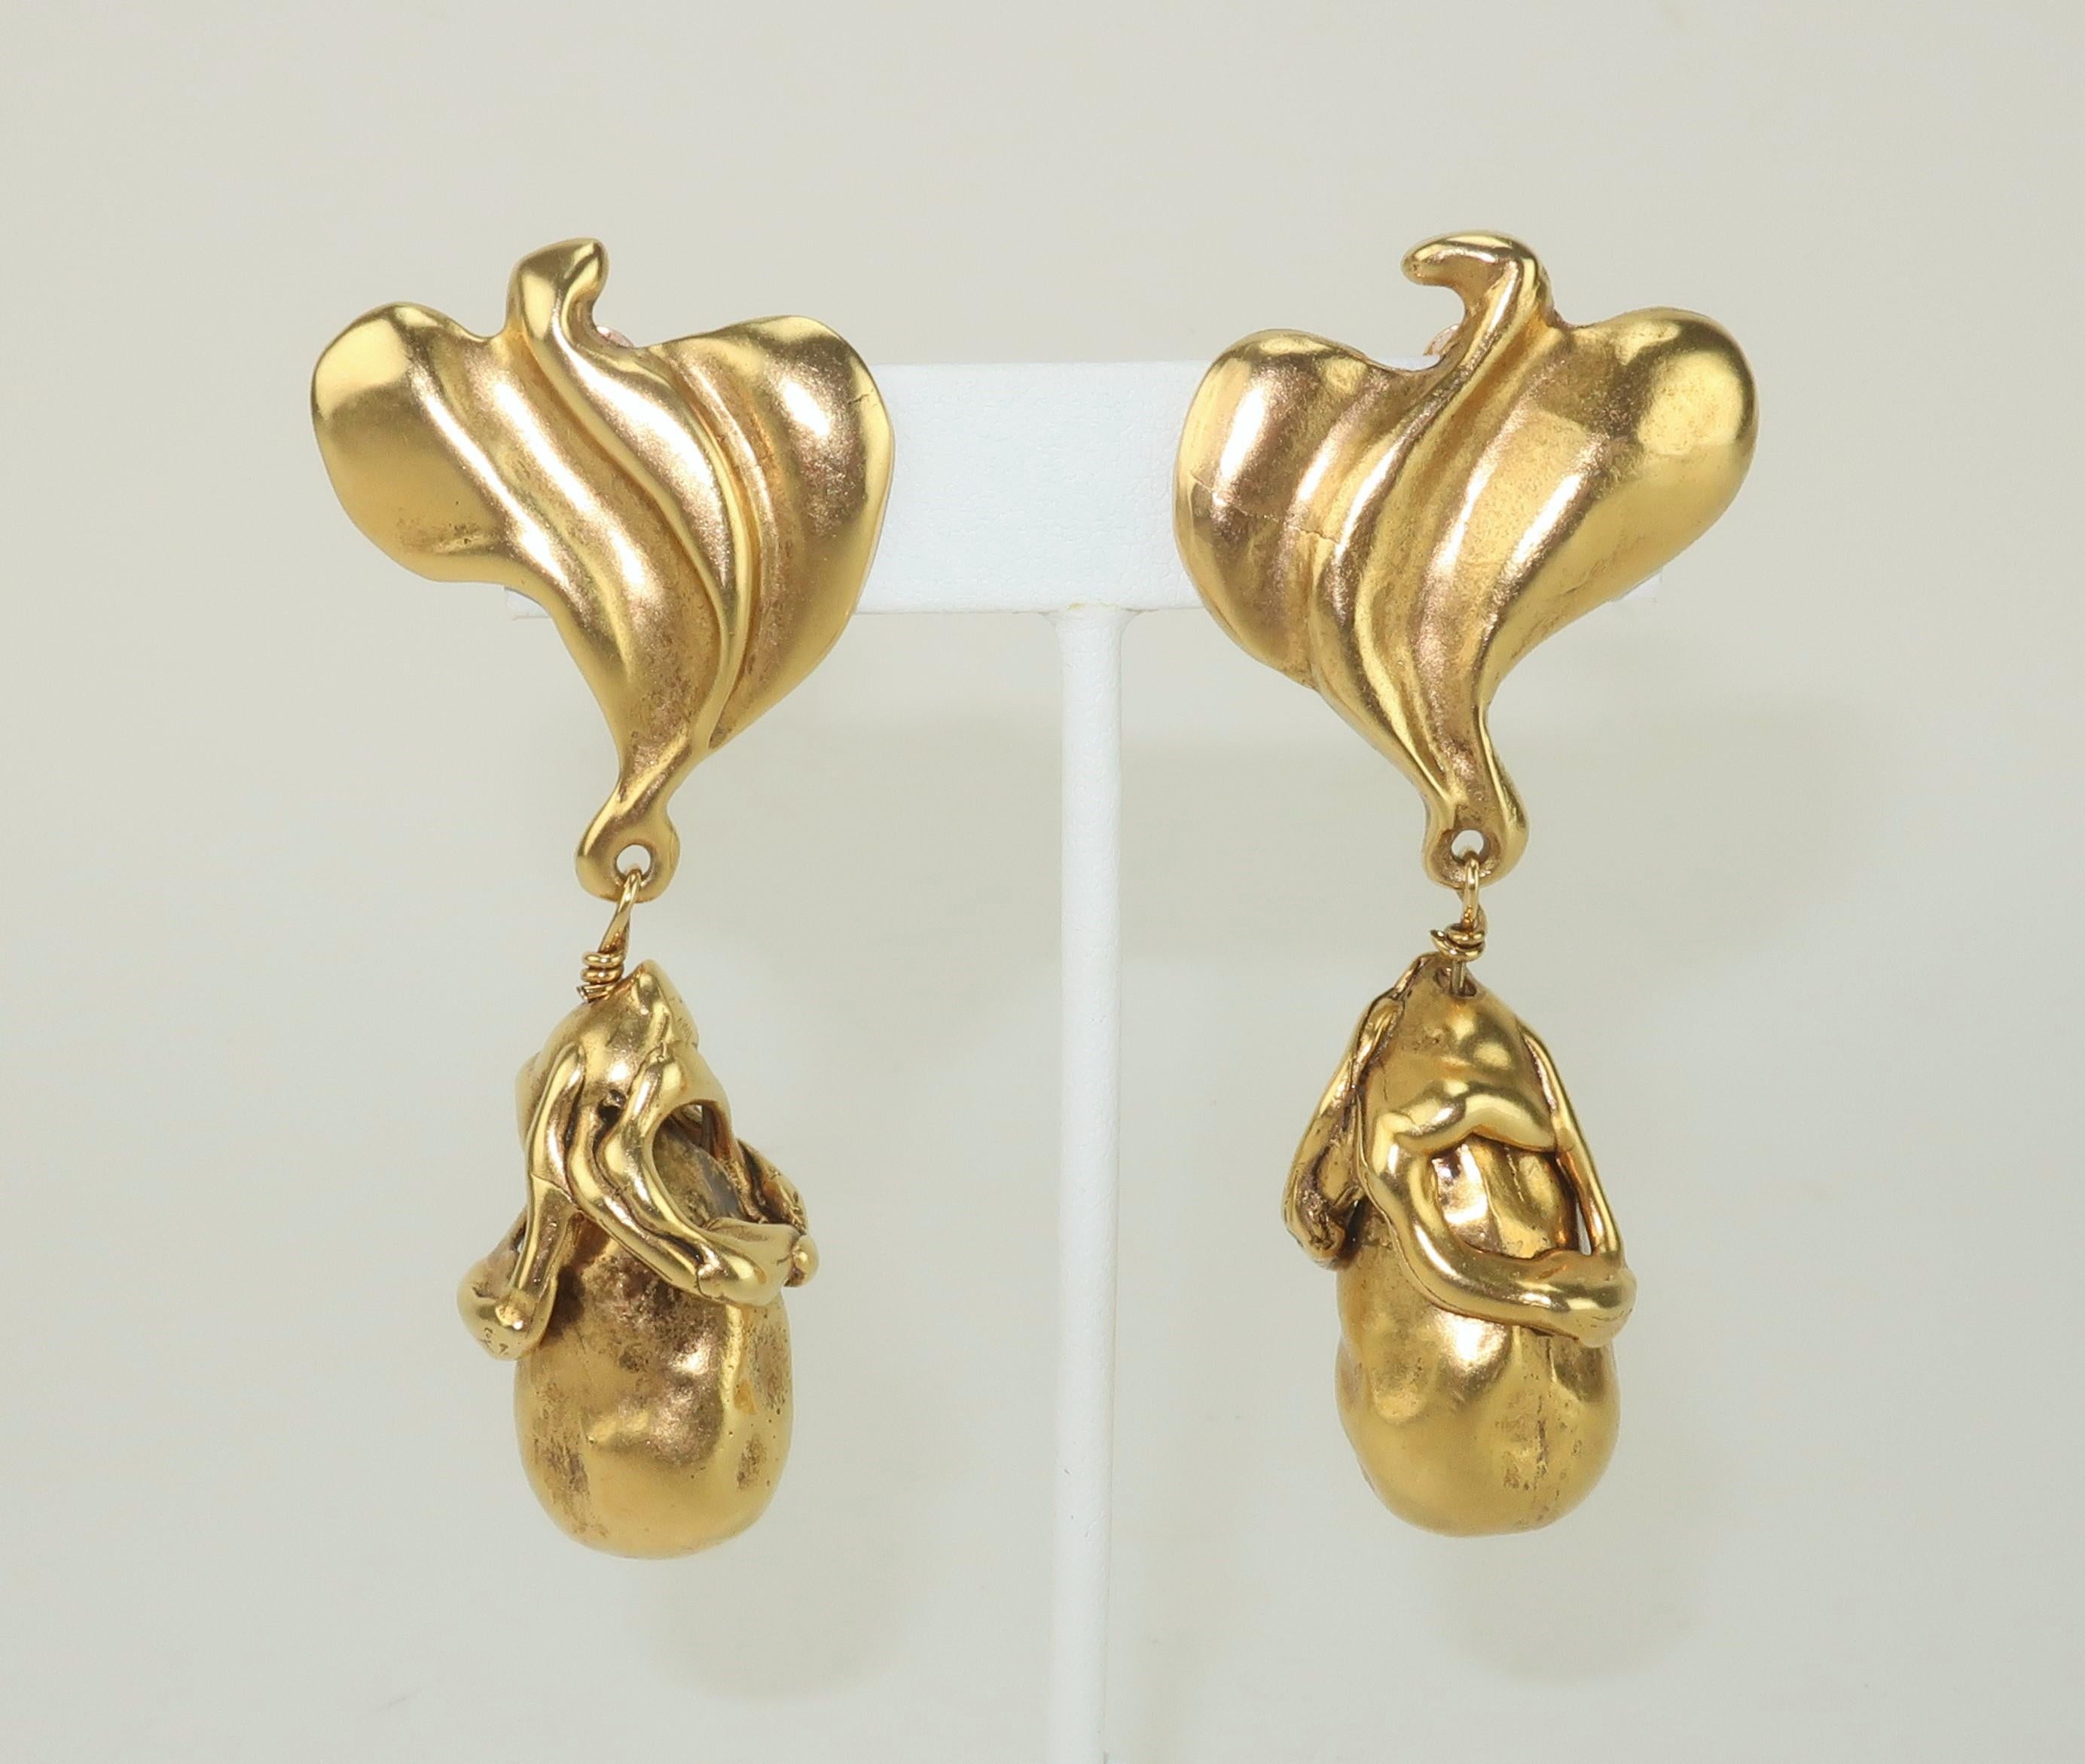 Late 20th Century Donna Karan gold tone clip on earrings depicting abstract birds and brutalist style drop dangles.  The earrings are beautifully made with quality details and a modernist look.  Hallmarked 'D. K.' at the back.  Please see the Modern